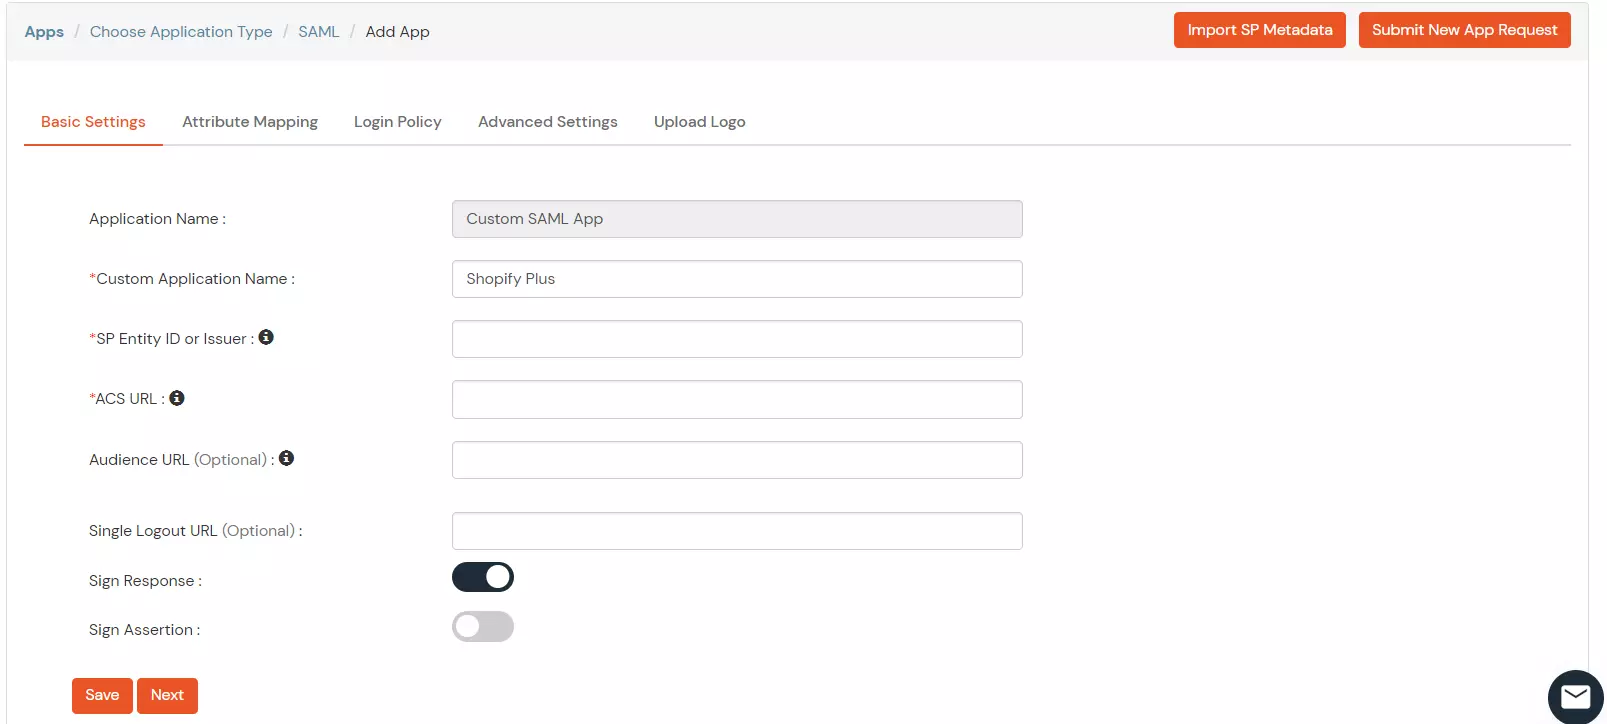 Shopify Plus two-factor authentication (2FA) : Add IdP basic settings